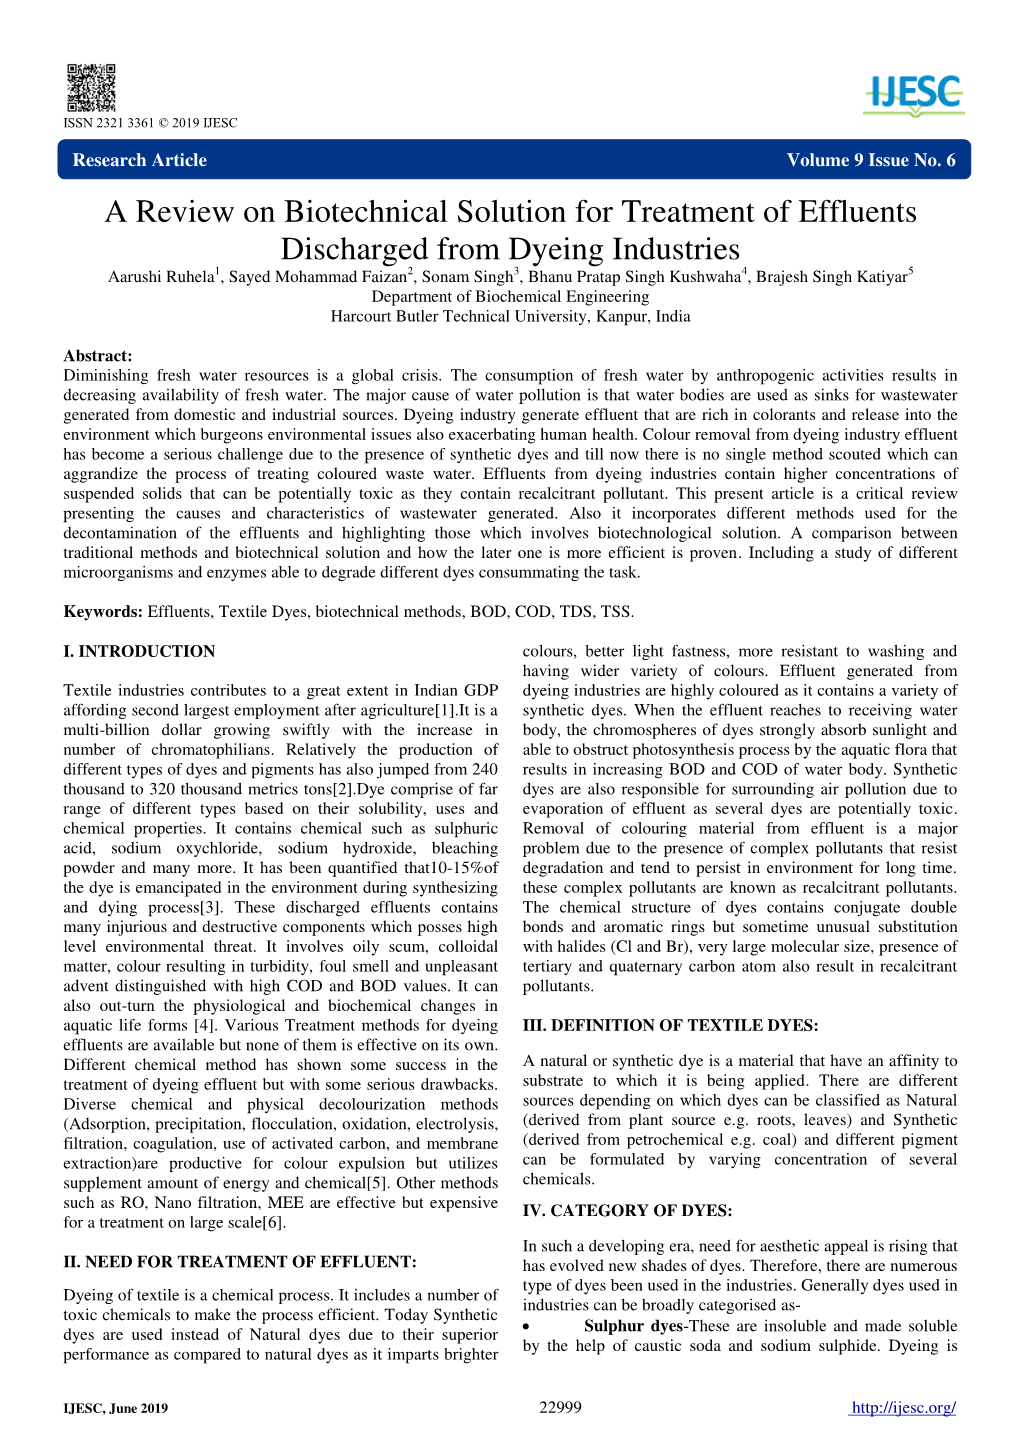 A Review on Biotechnical Solution for Treatment of Effluents Discharged from Dyeing Industries